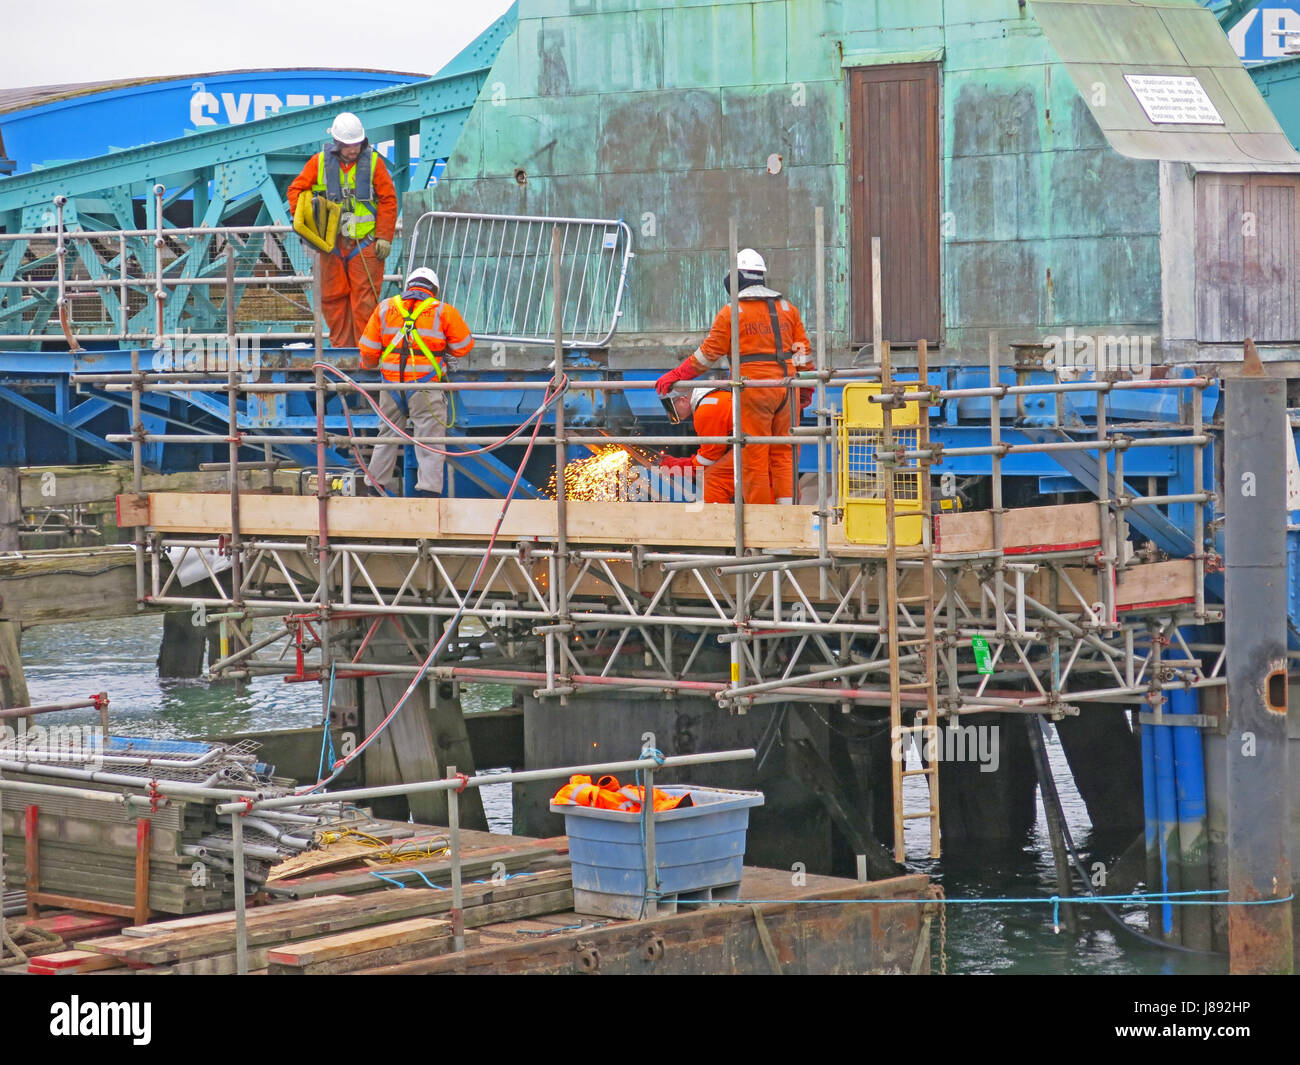 The historic bascule lifting bridge in Poole undergoing a major refurbishment and refit during 2017, Dorset, England Stock Photo